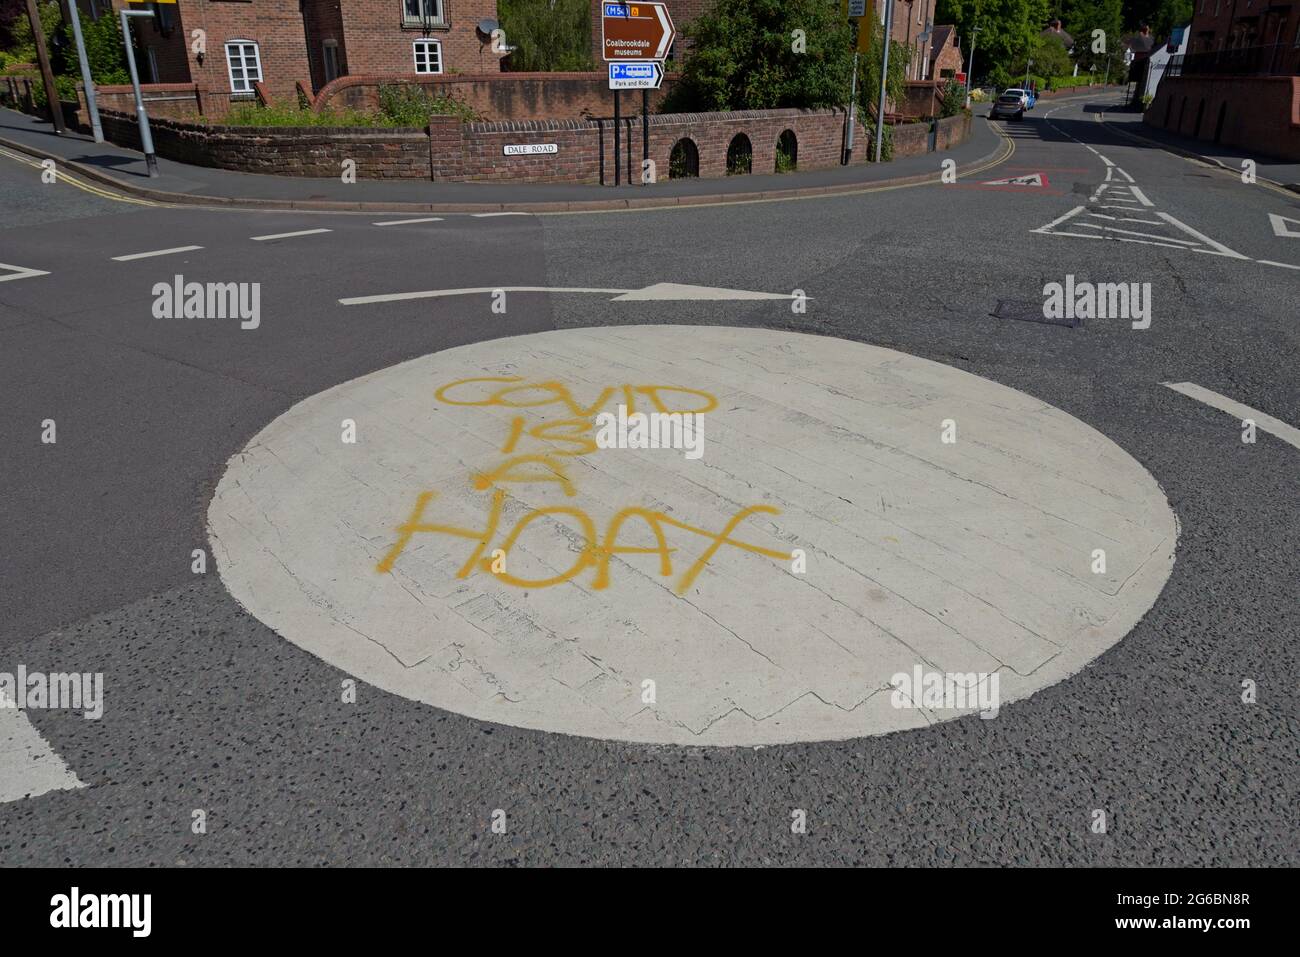 'Covid is a hoax' spray painted on a roundabout in Ironbridge, near Telford UK, by Covid deniers, June 2021 Stock Photo